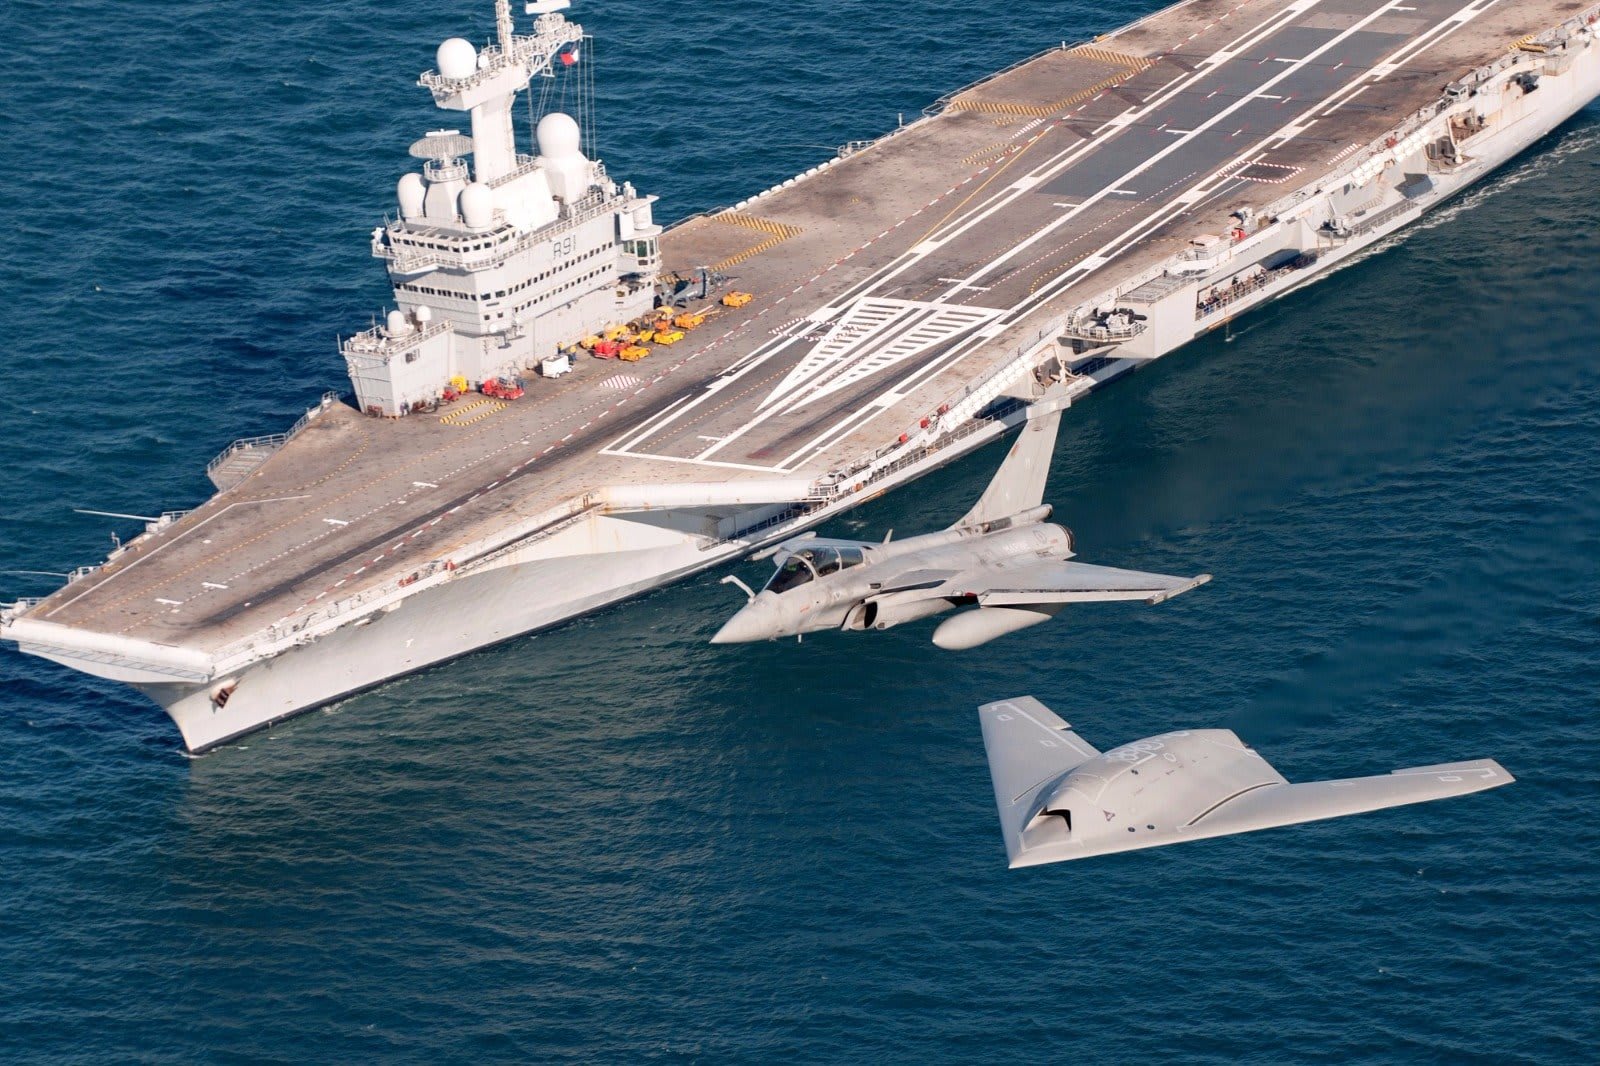 In May 2016, the DGA launched a new nEUROn flight test campaign in France to study the use of an unmanned combat air vehicle in a naval context. Tests at sea with the Charles de Gaulle aircraft carrier has been carried out.